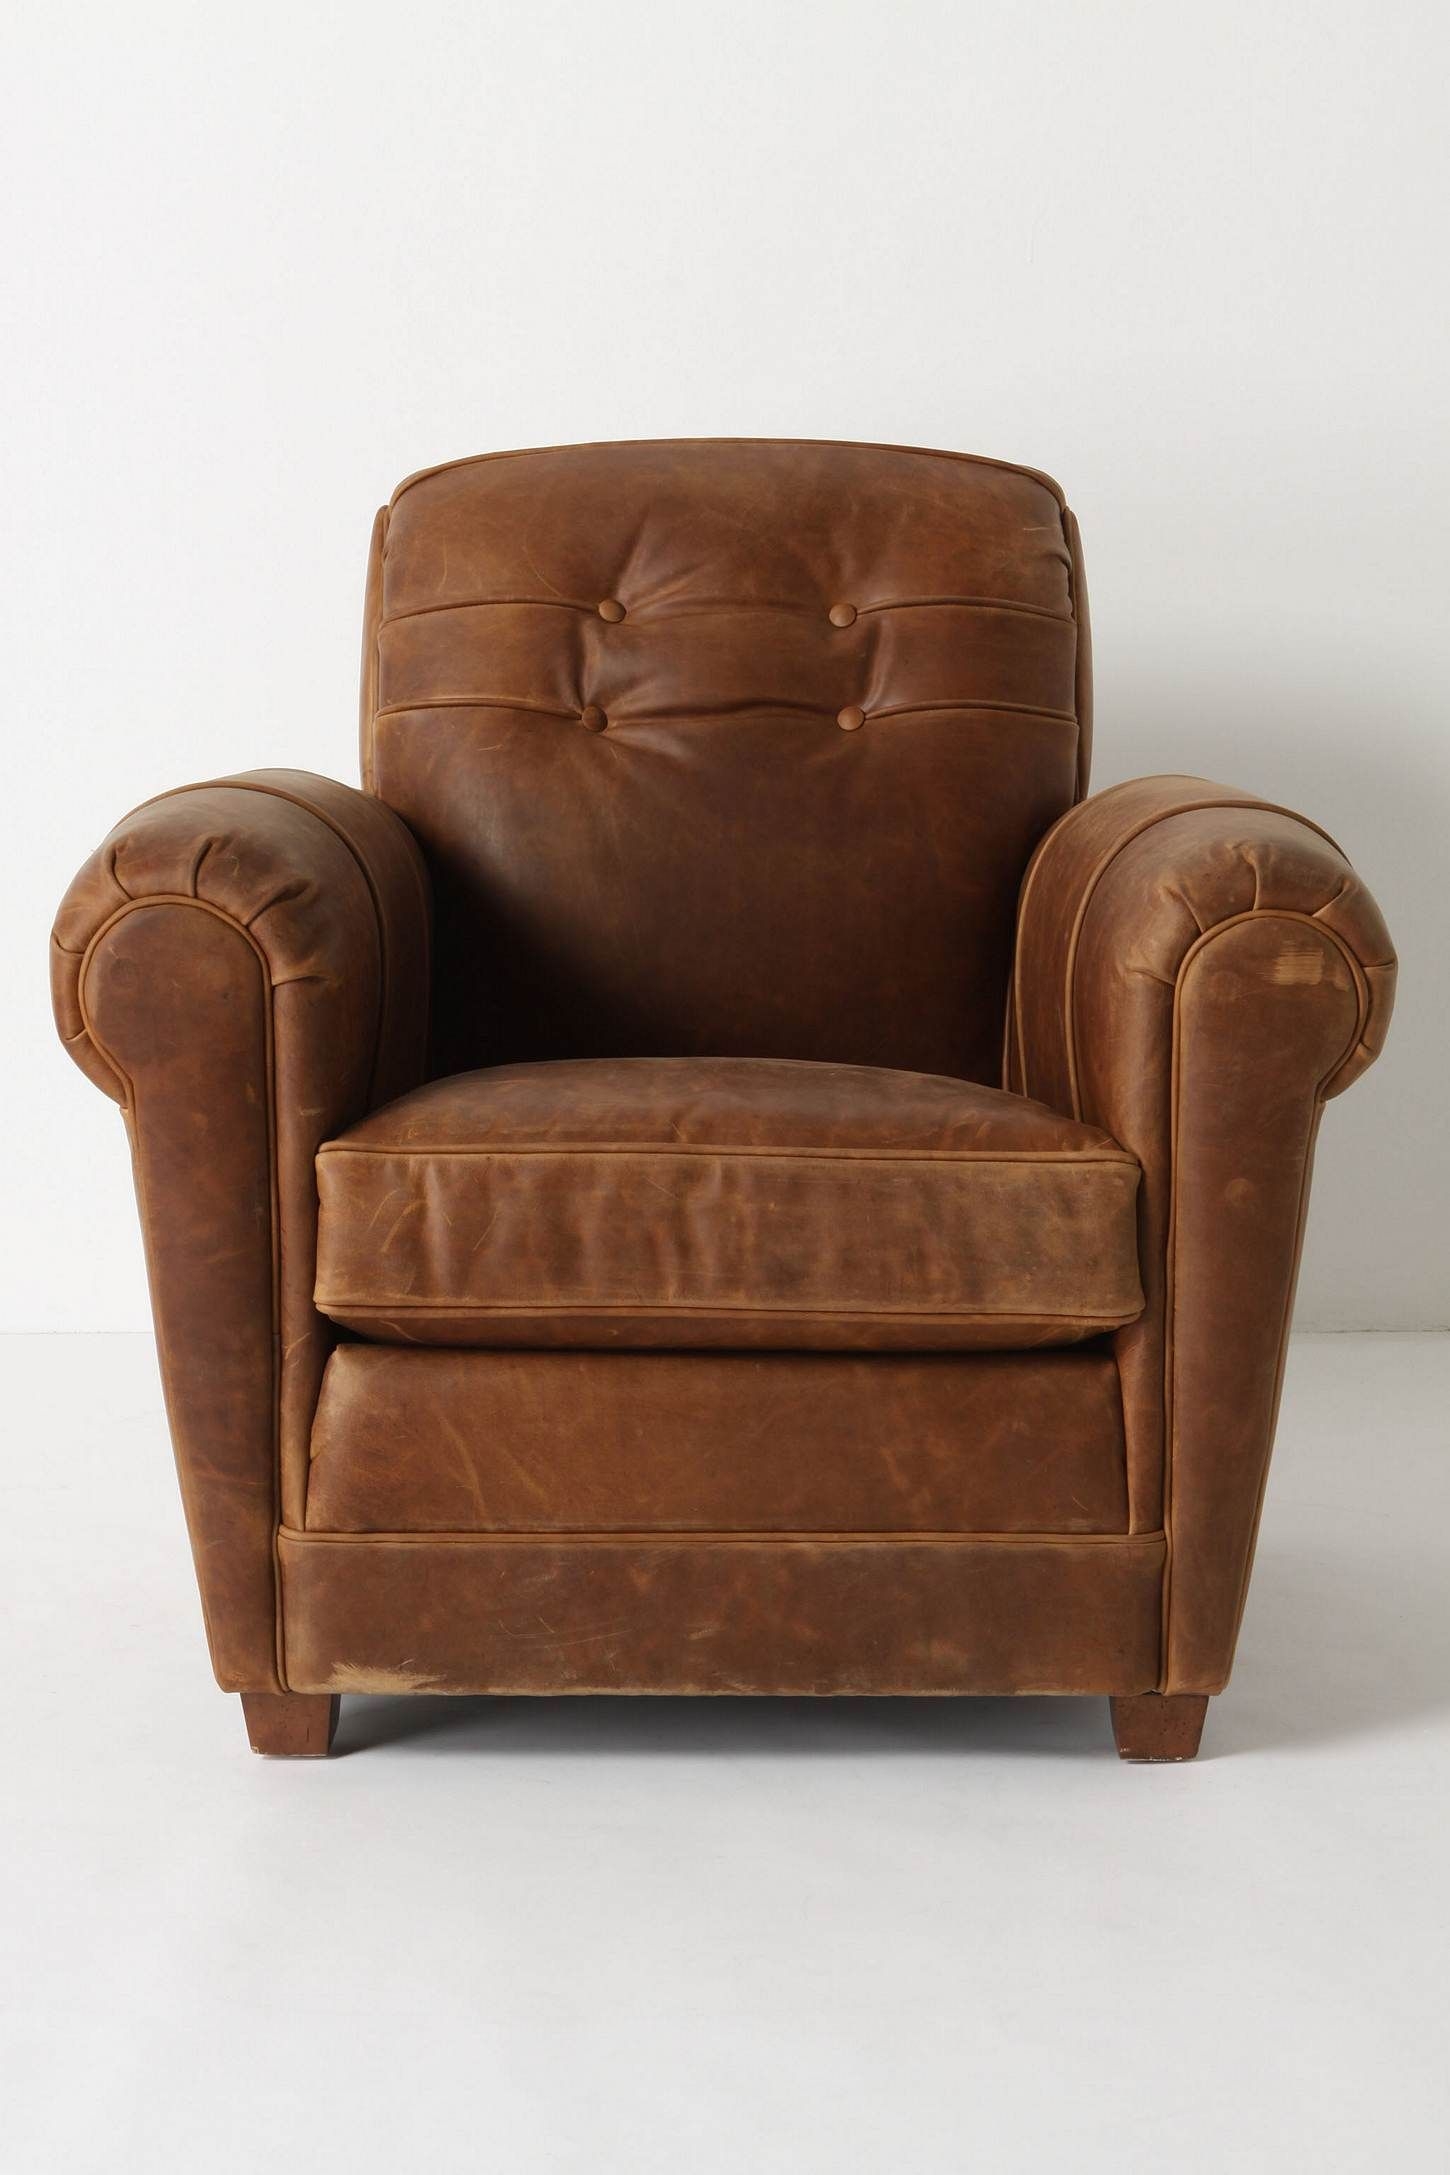 Small leather recliners chairs